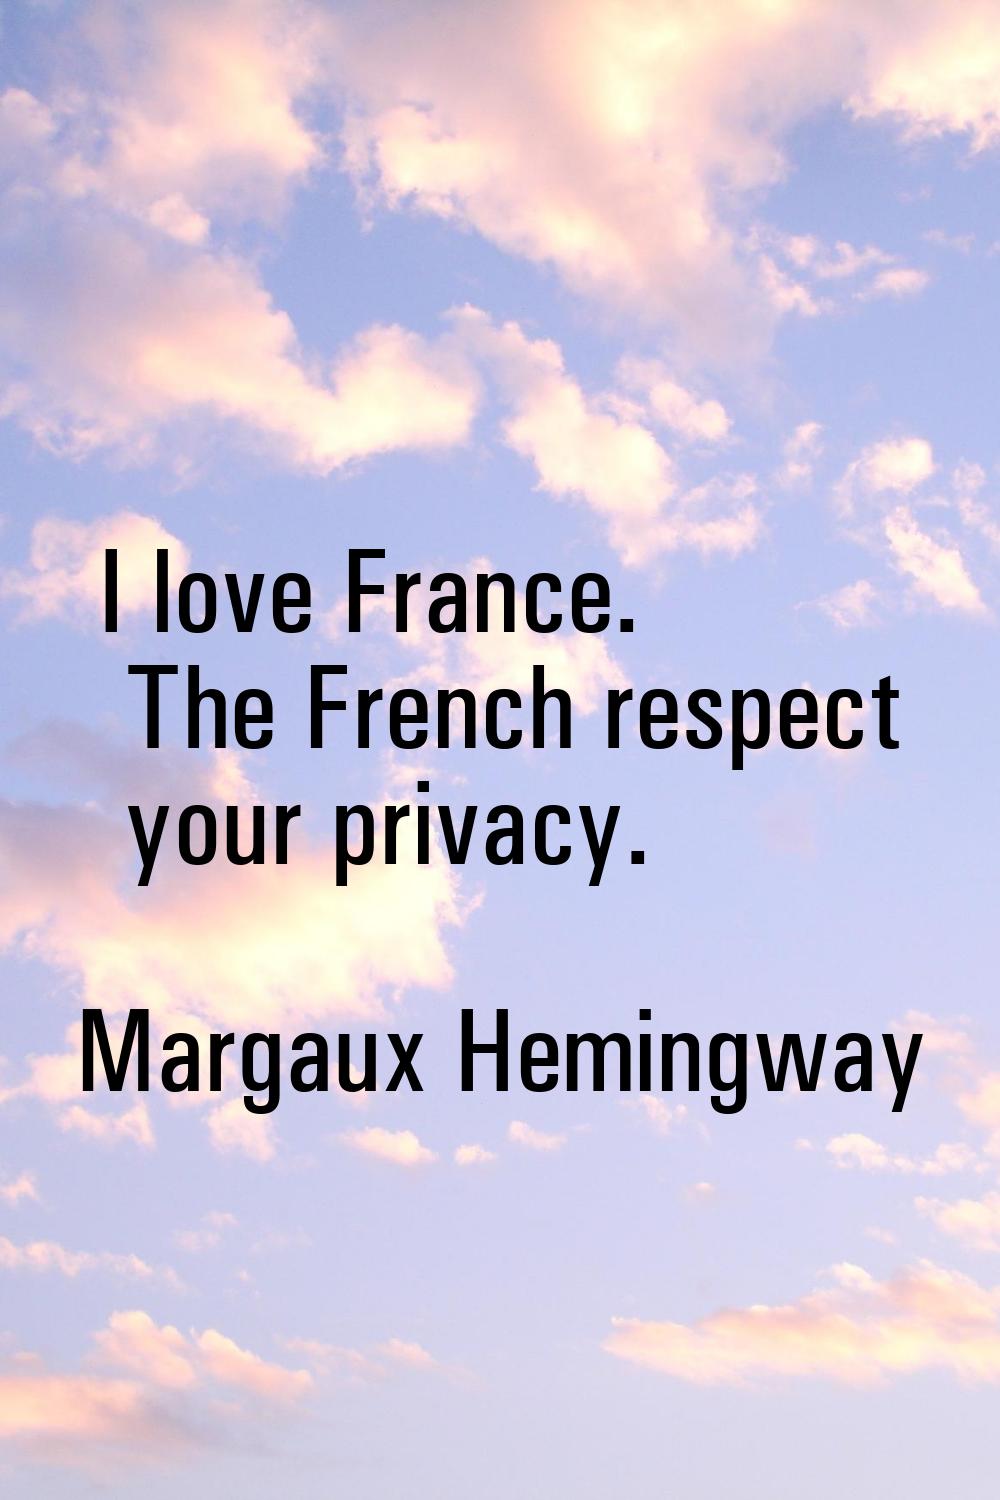 I love France. The French respect your privacy.